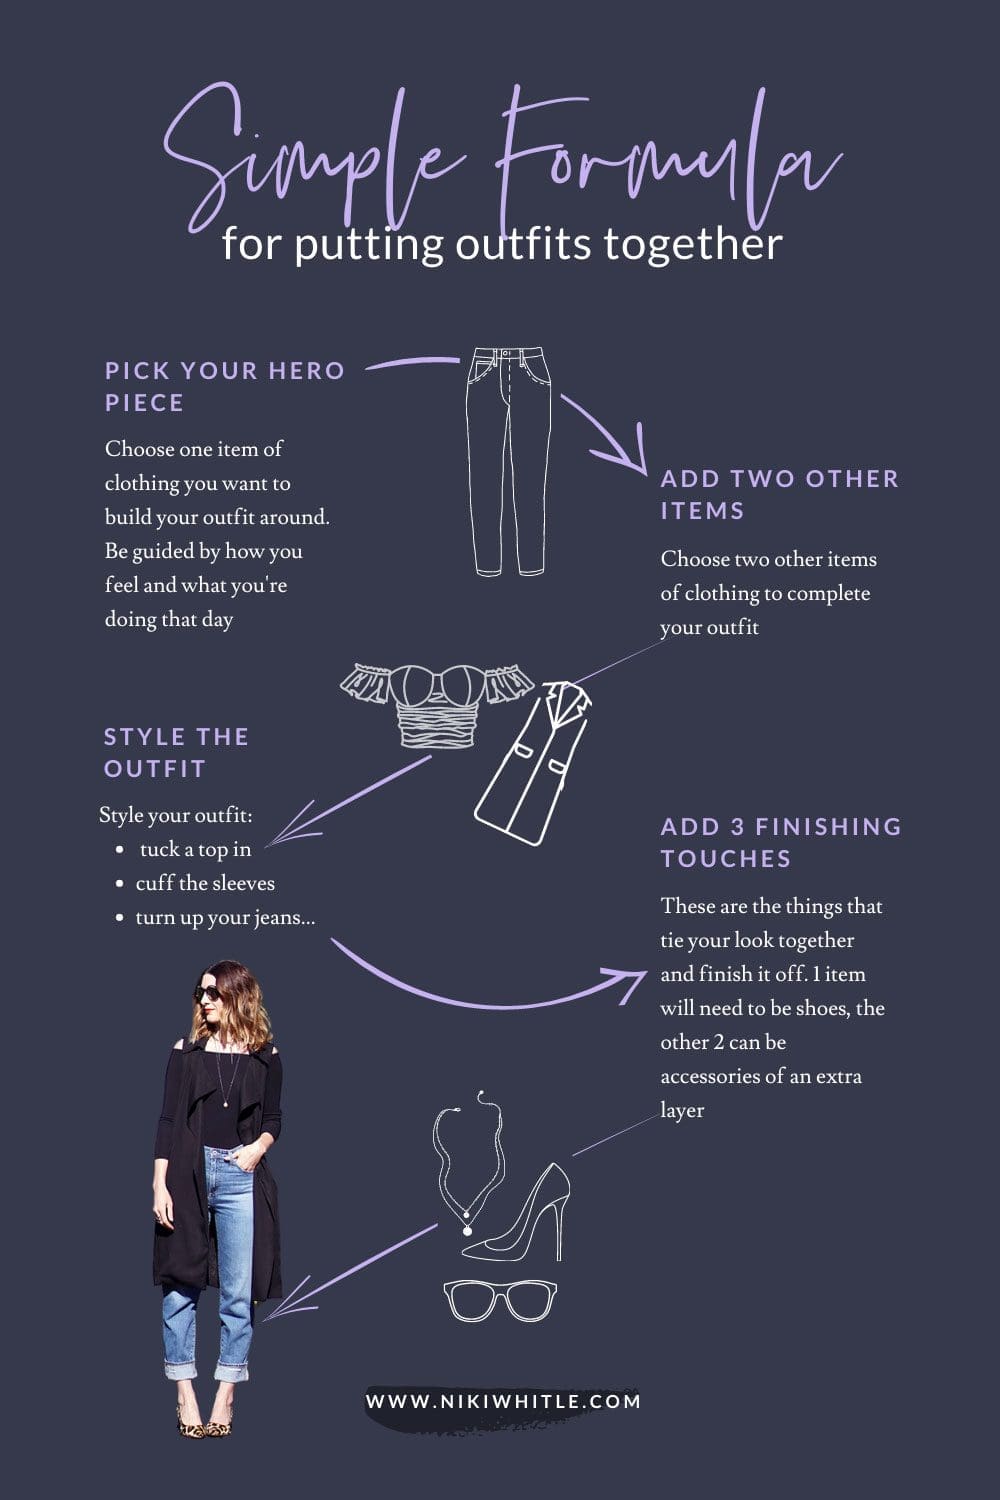 A simple formula for how to put an outfit together